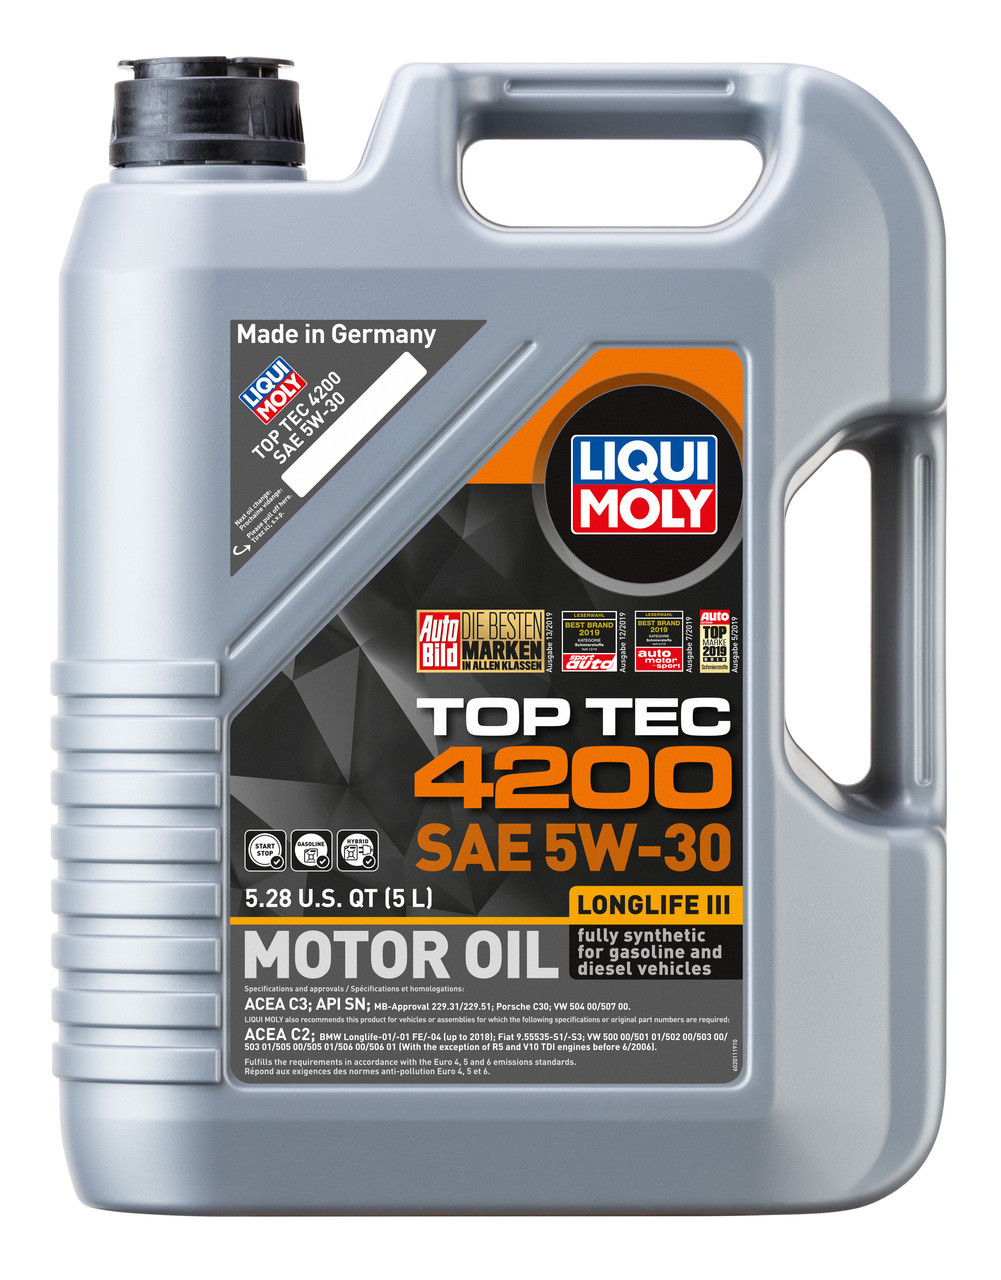 LIQUI MOLY Synthoil Premium SAE 5W-40 | 5 L | Synthesis technology motor  oil | SKU: 2041